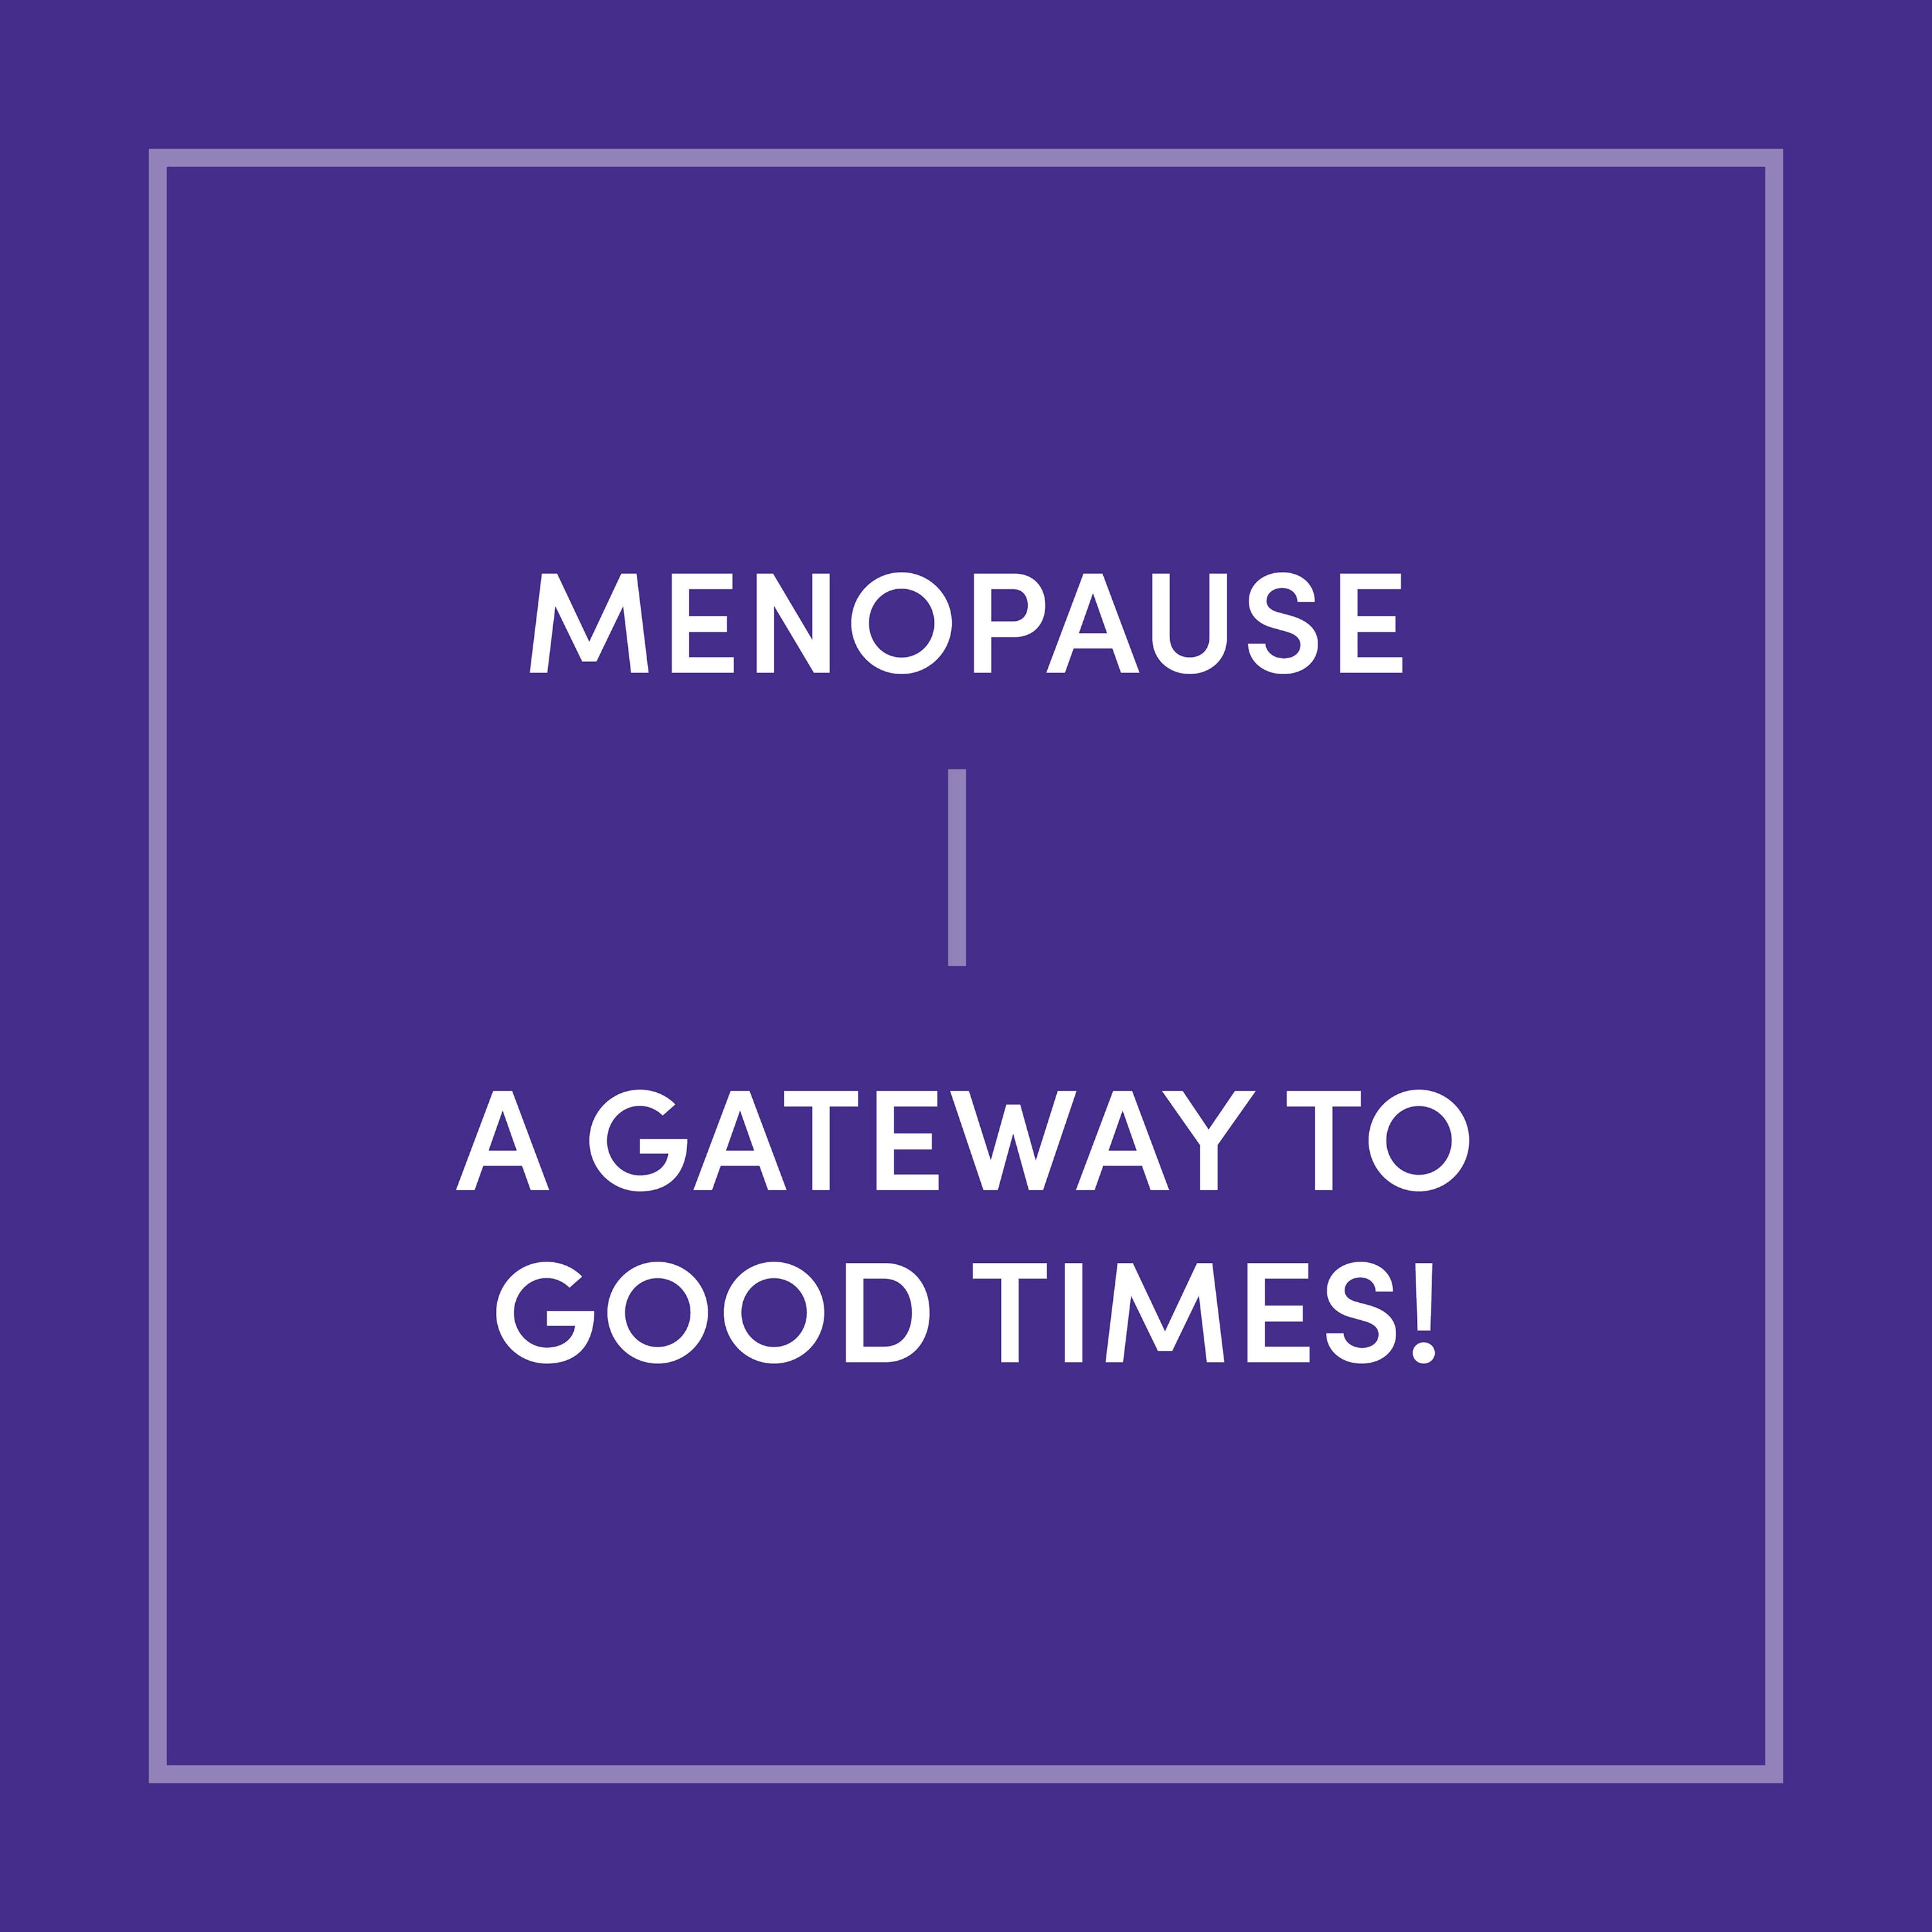 Menopause - A Gateway to Good Times!